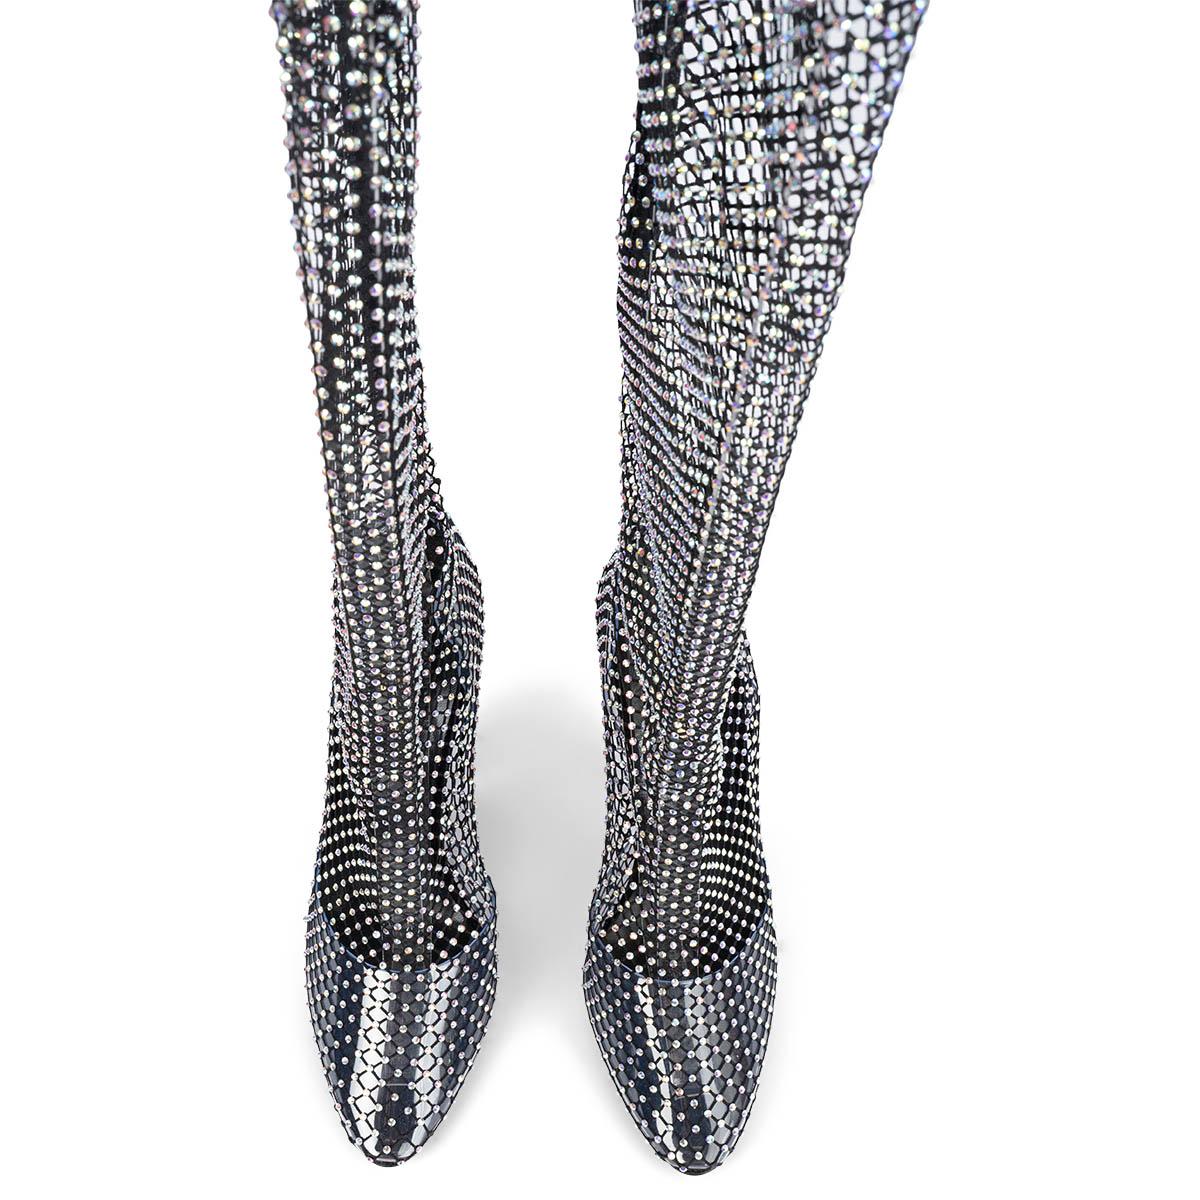 SAINT LAURENT silver LUREX MESH 68 110 RHINESTONE Boots Shoes 42 run small In Excellent Condition For Sale In Zürich, CH